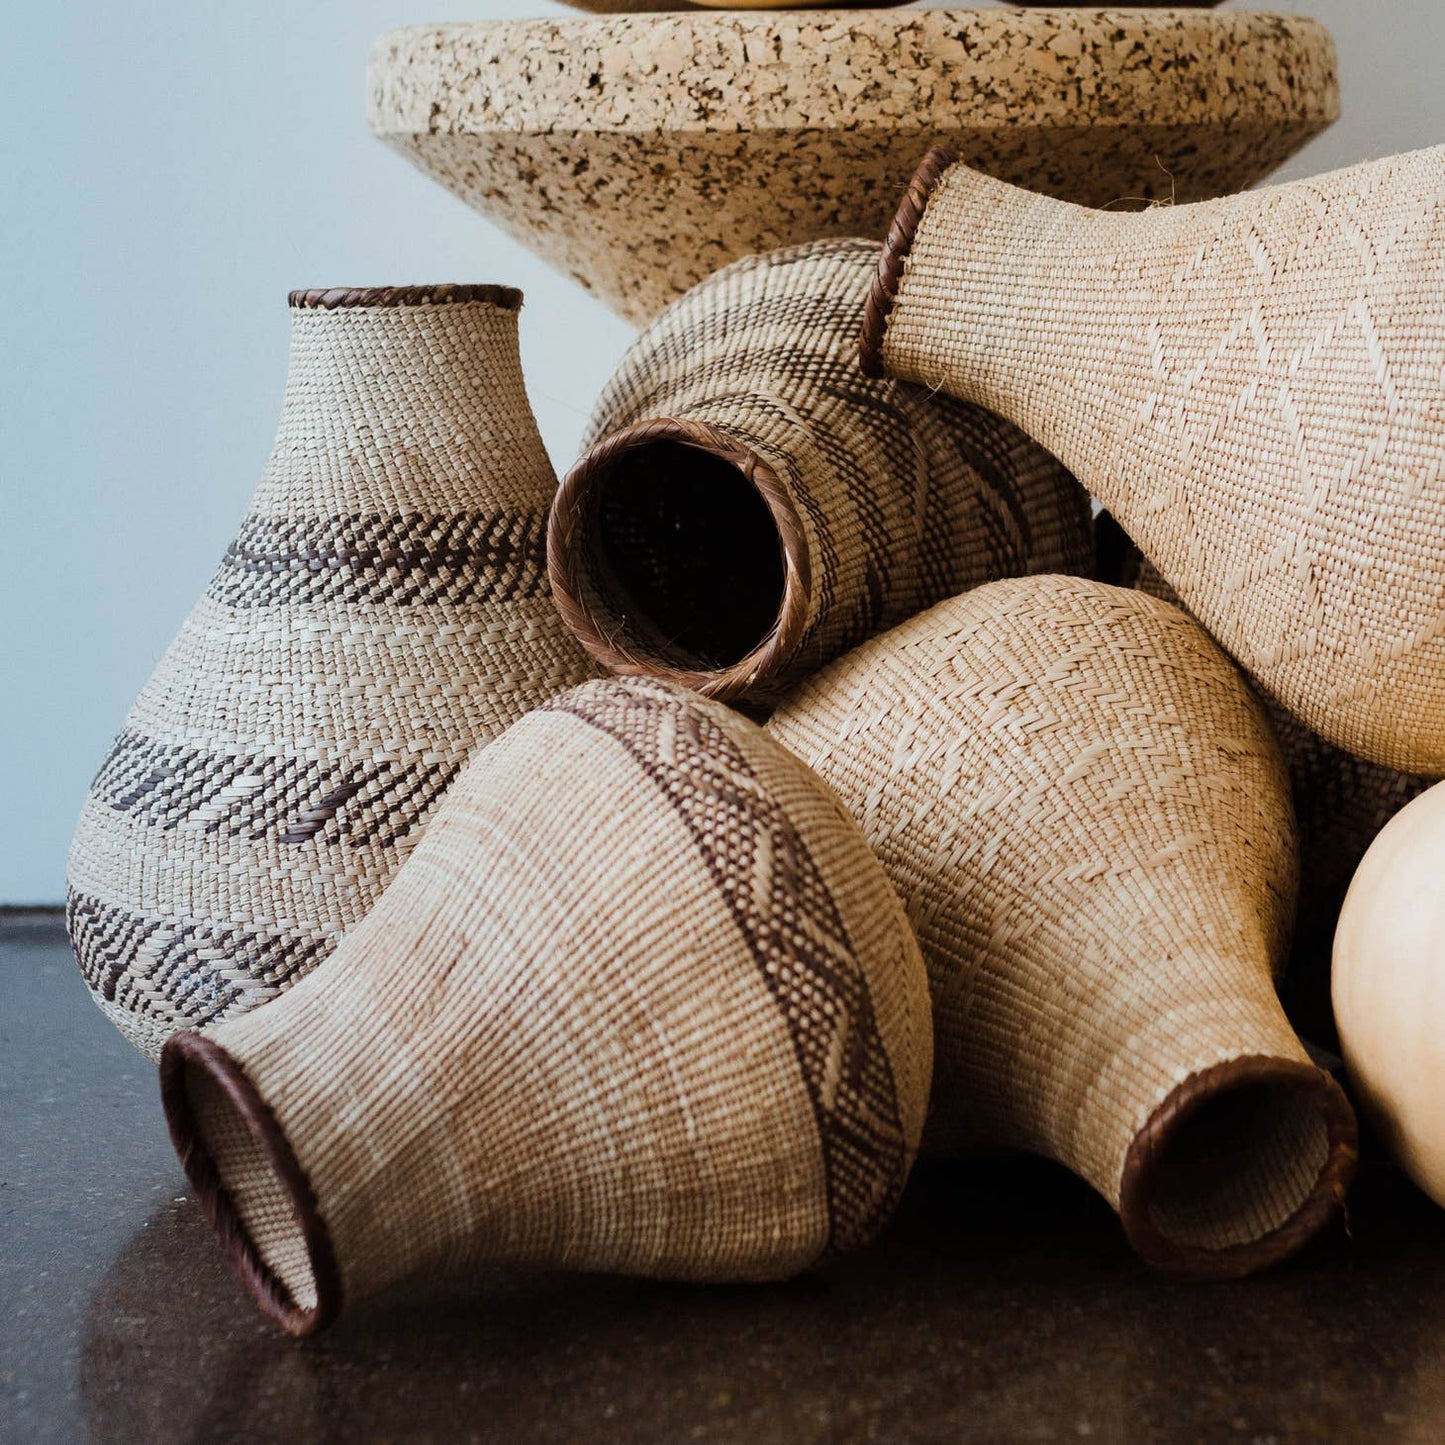 Handwoven by artisans in Africa to resemble the gourds traditionally used for grain storage or water carrying, these baskets provide a delightfully natural  element, with varied abstract, geometric patterns created by weaving in darker fibers. 